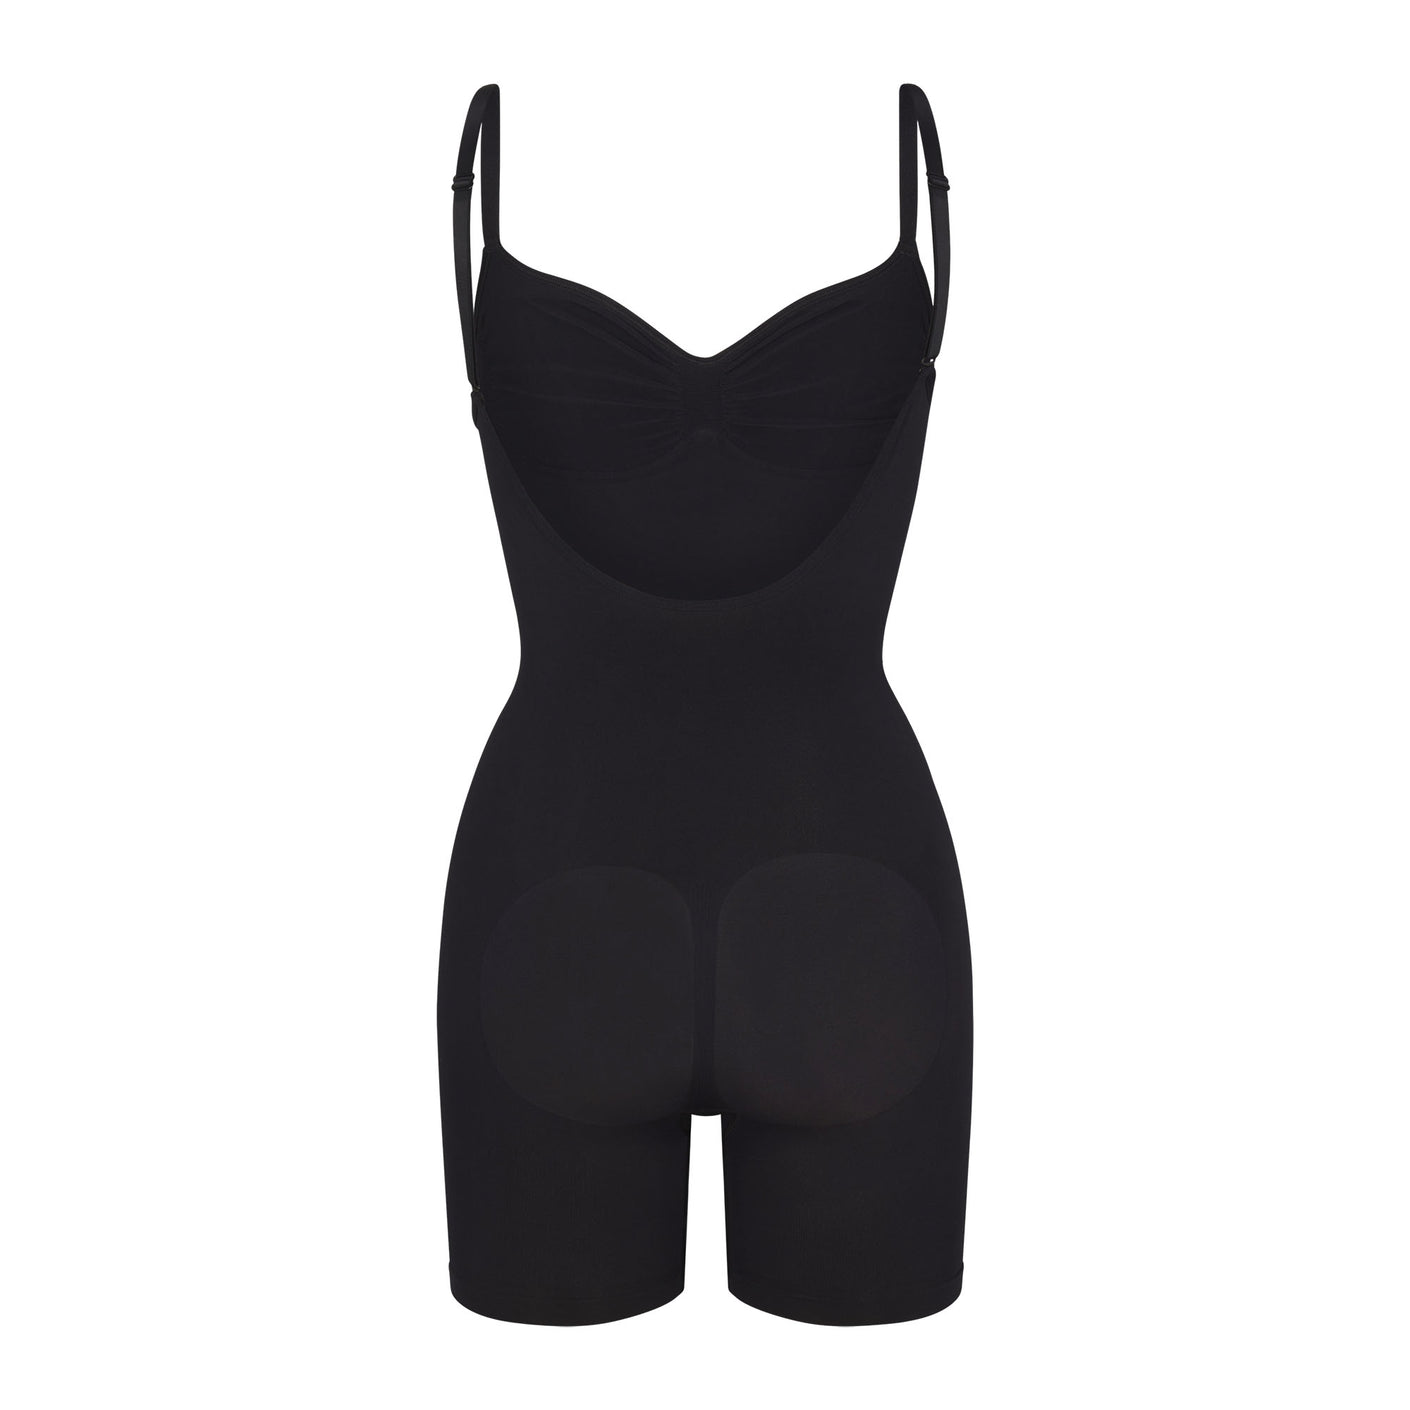 SKIMS: The Sheer Sculpt Catsuit Is Back!